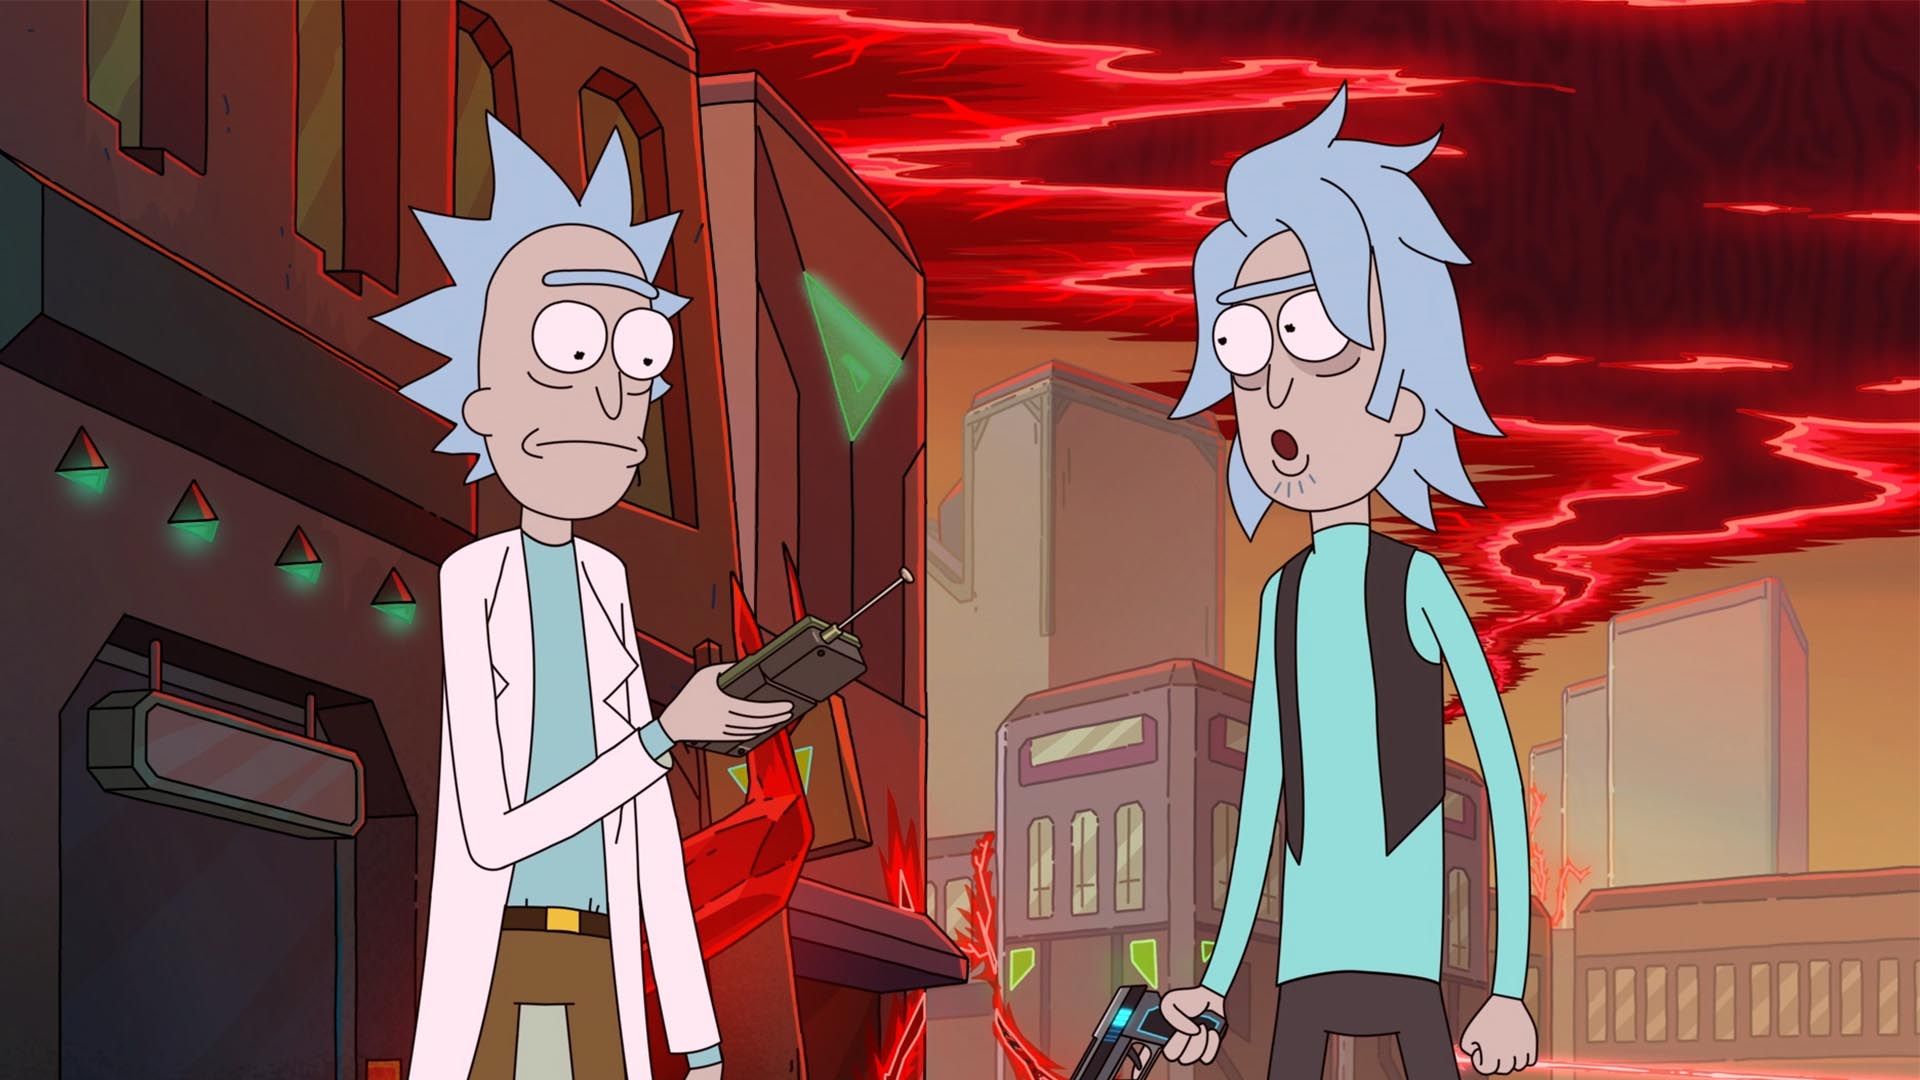 Rick and Morty season 6 gives fans what they've always wanted